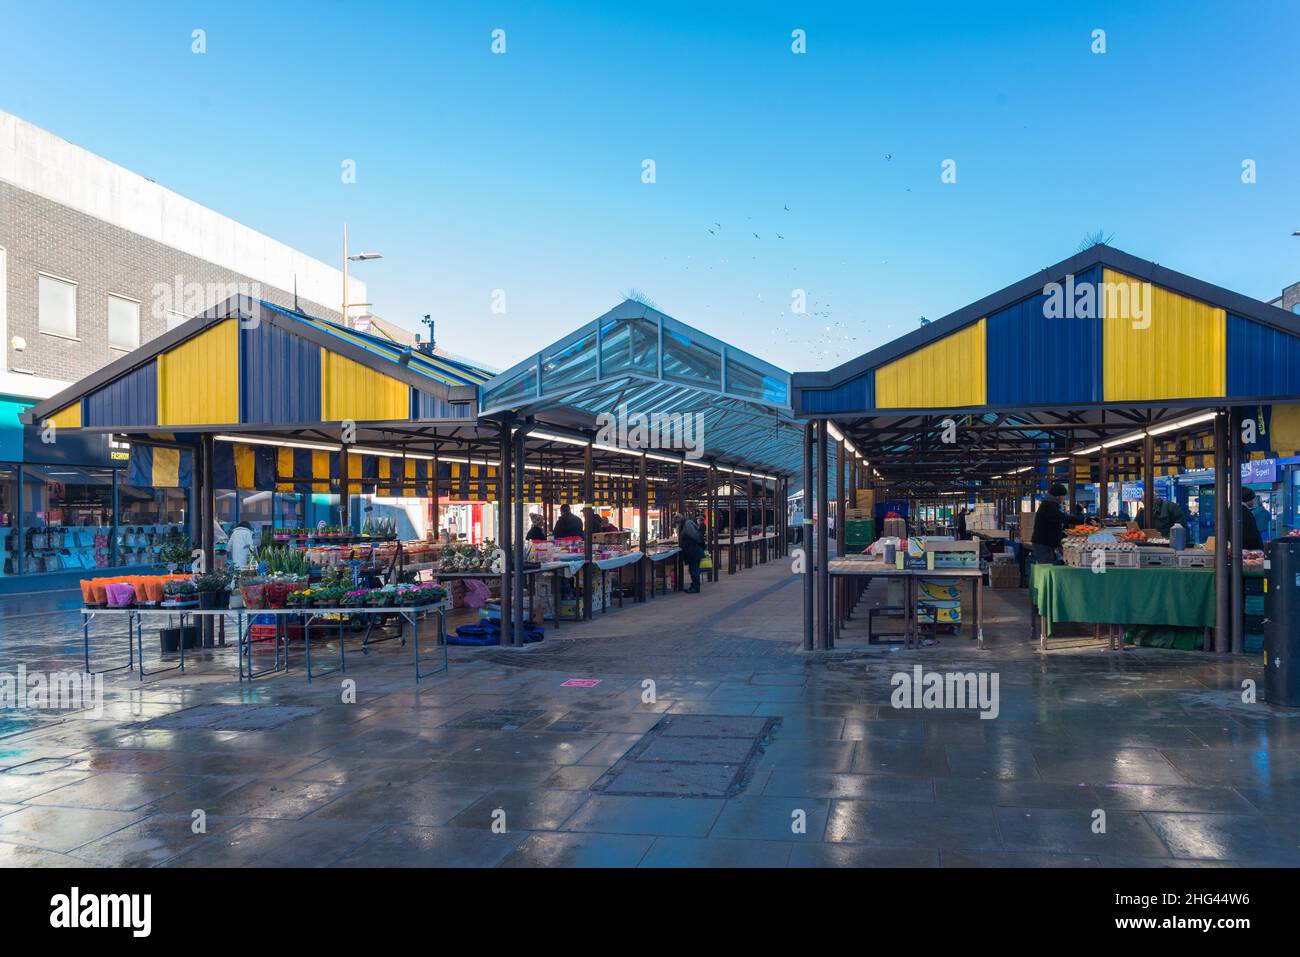 The outdoor market in the centre of Dudley, West Midlands, UK Stock Photo